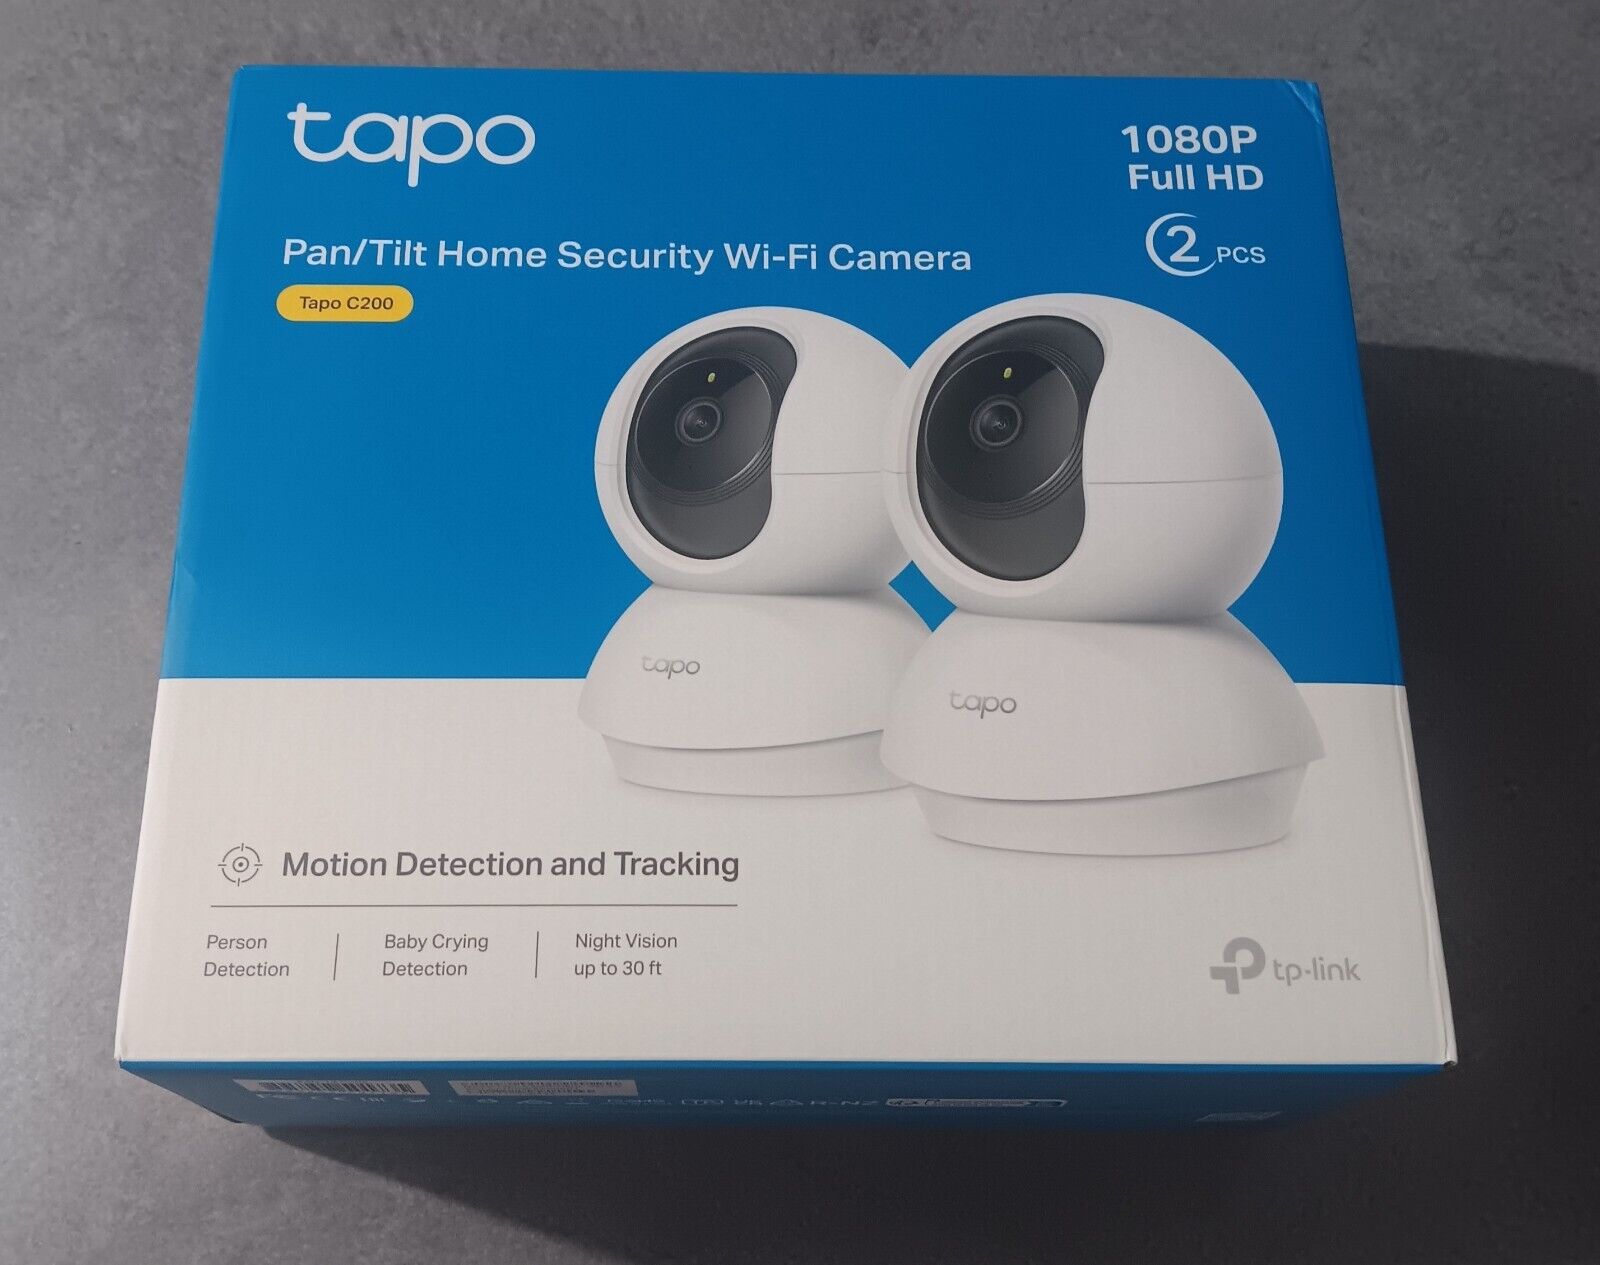 2x Tp-Link Tapo C200 Pan/Tilt Smart Home Security Wi-Fi Cameras + 128GB SD cards